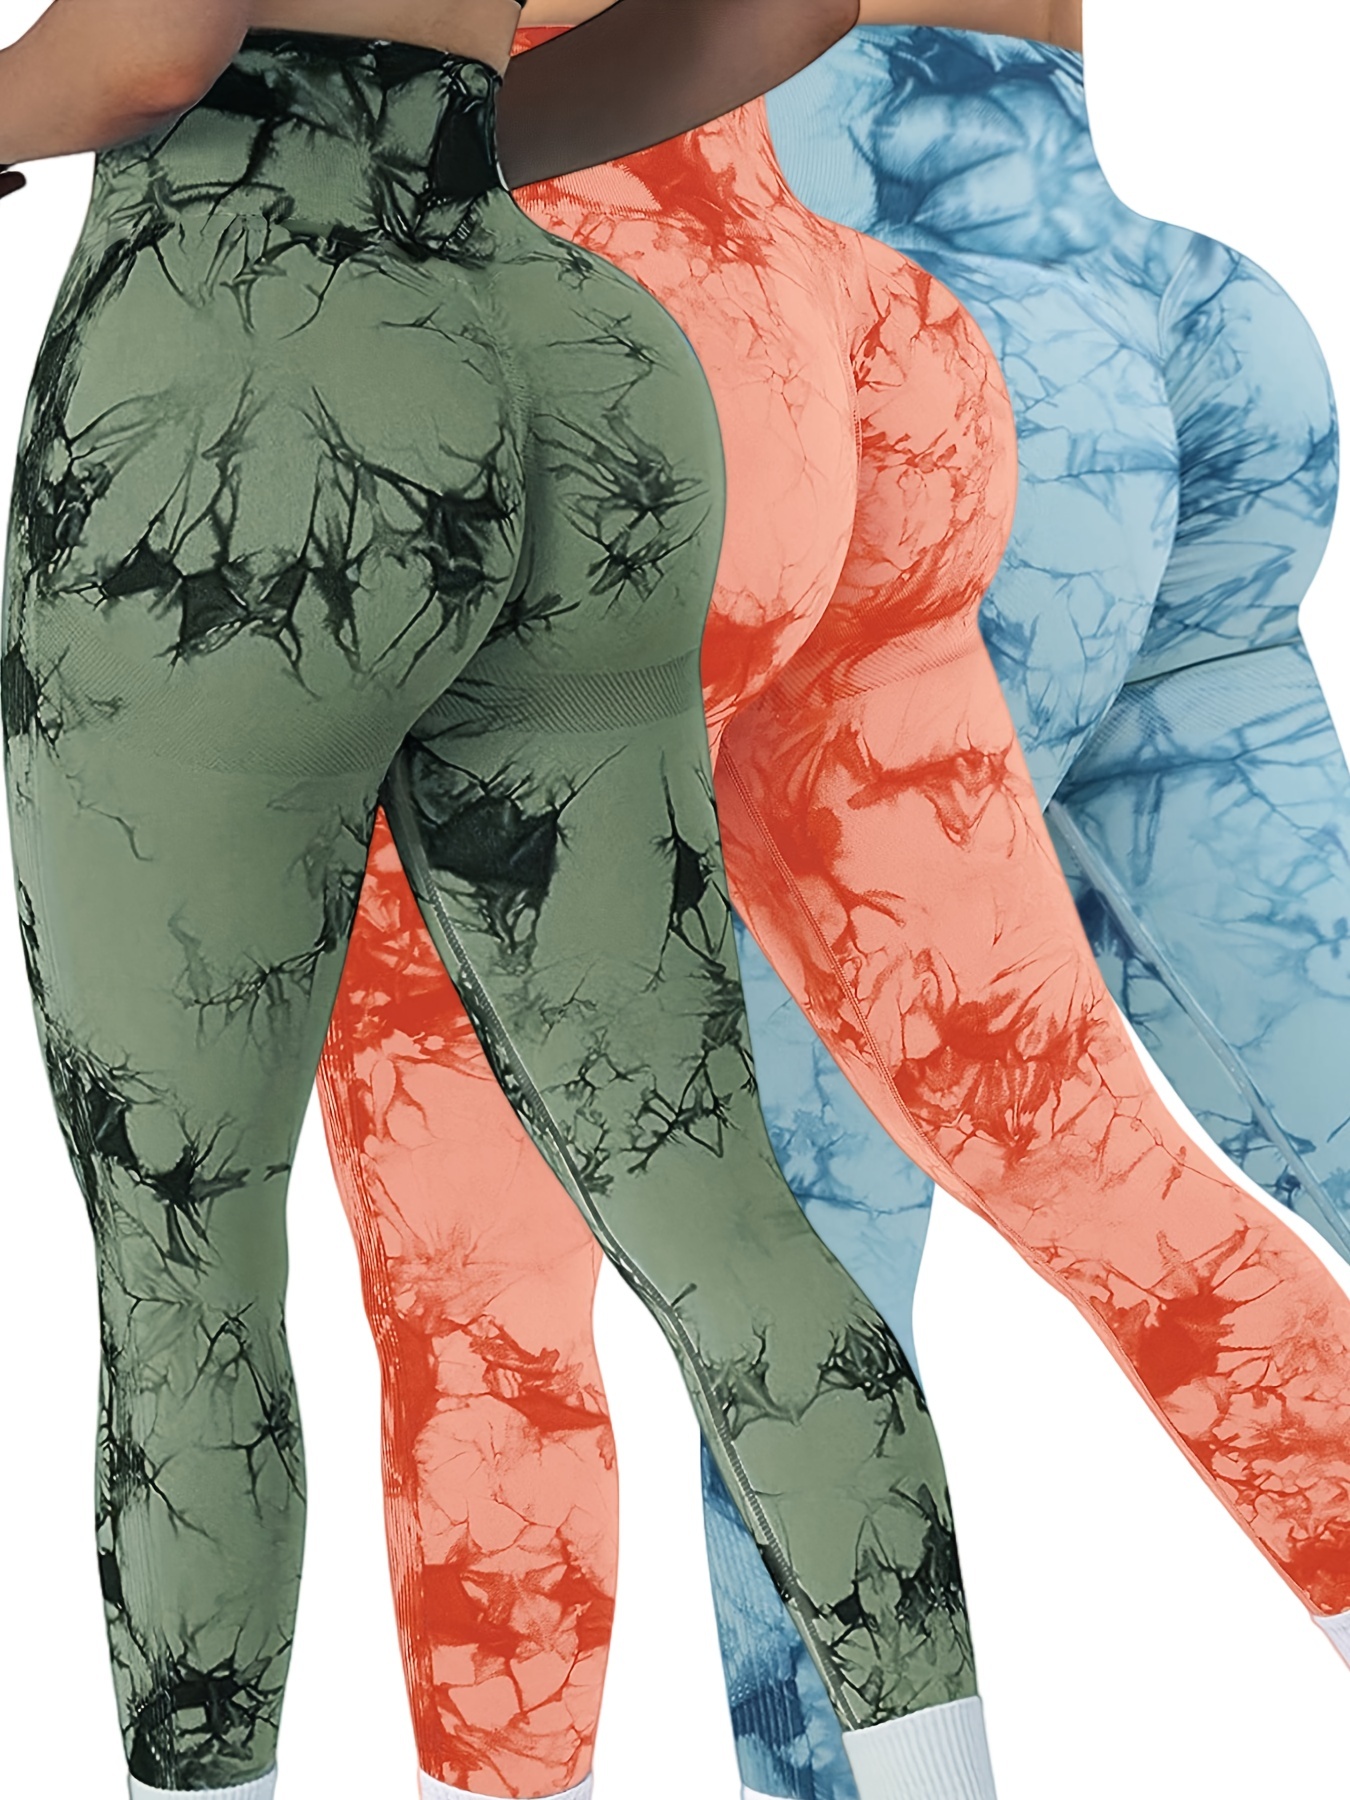  Dream Tie Dye Workout Leggings For Women Seamless High Waist  Scrunch Athletic Running Gym Fitness Active Pants